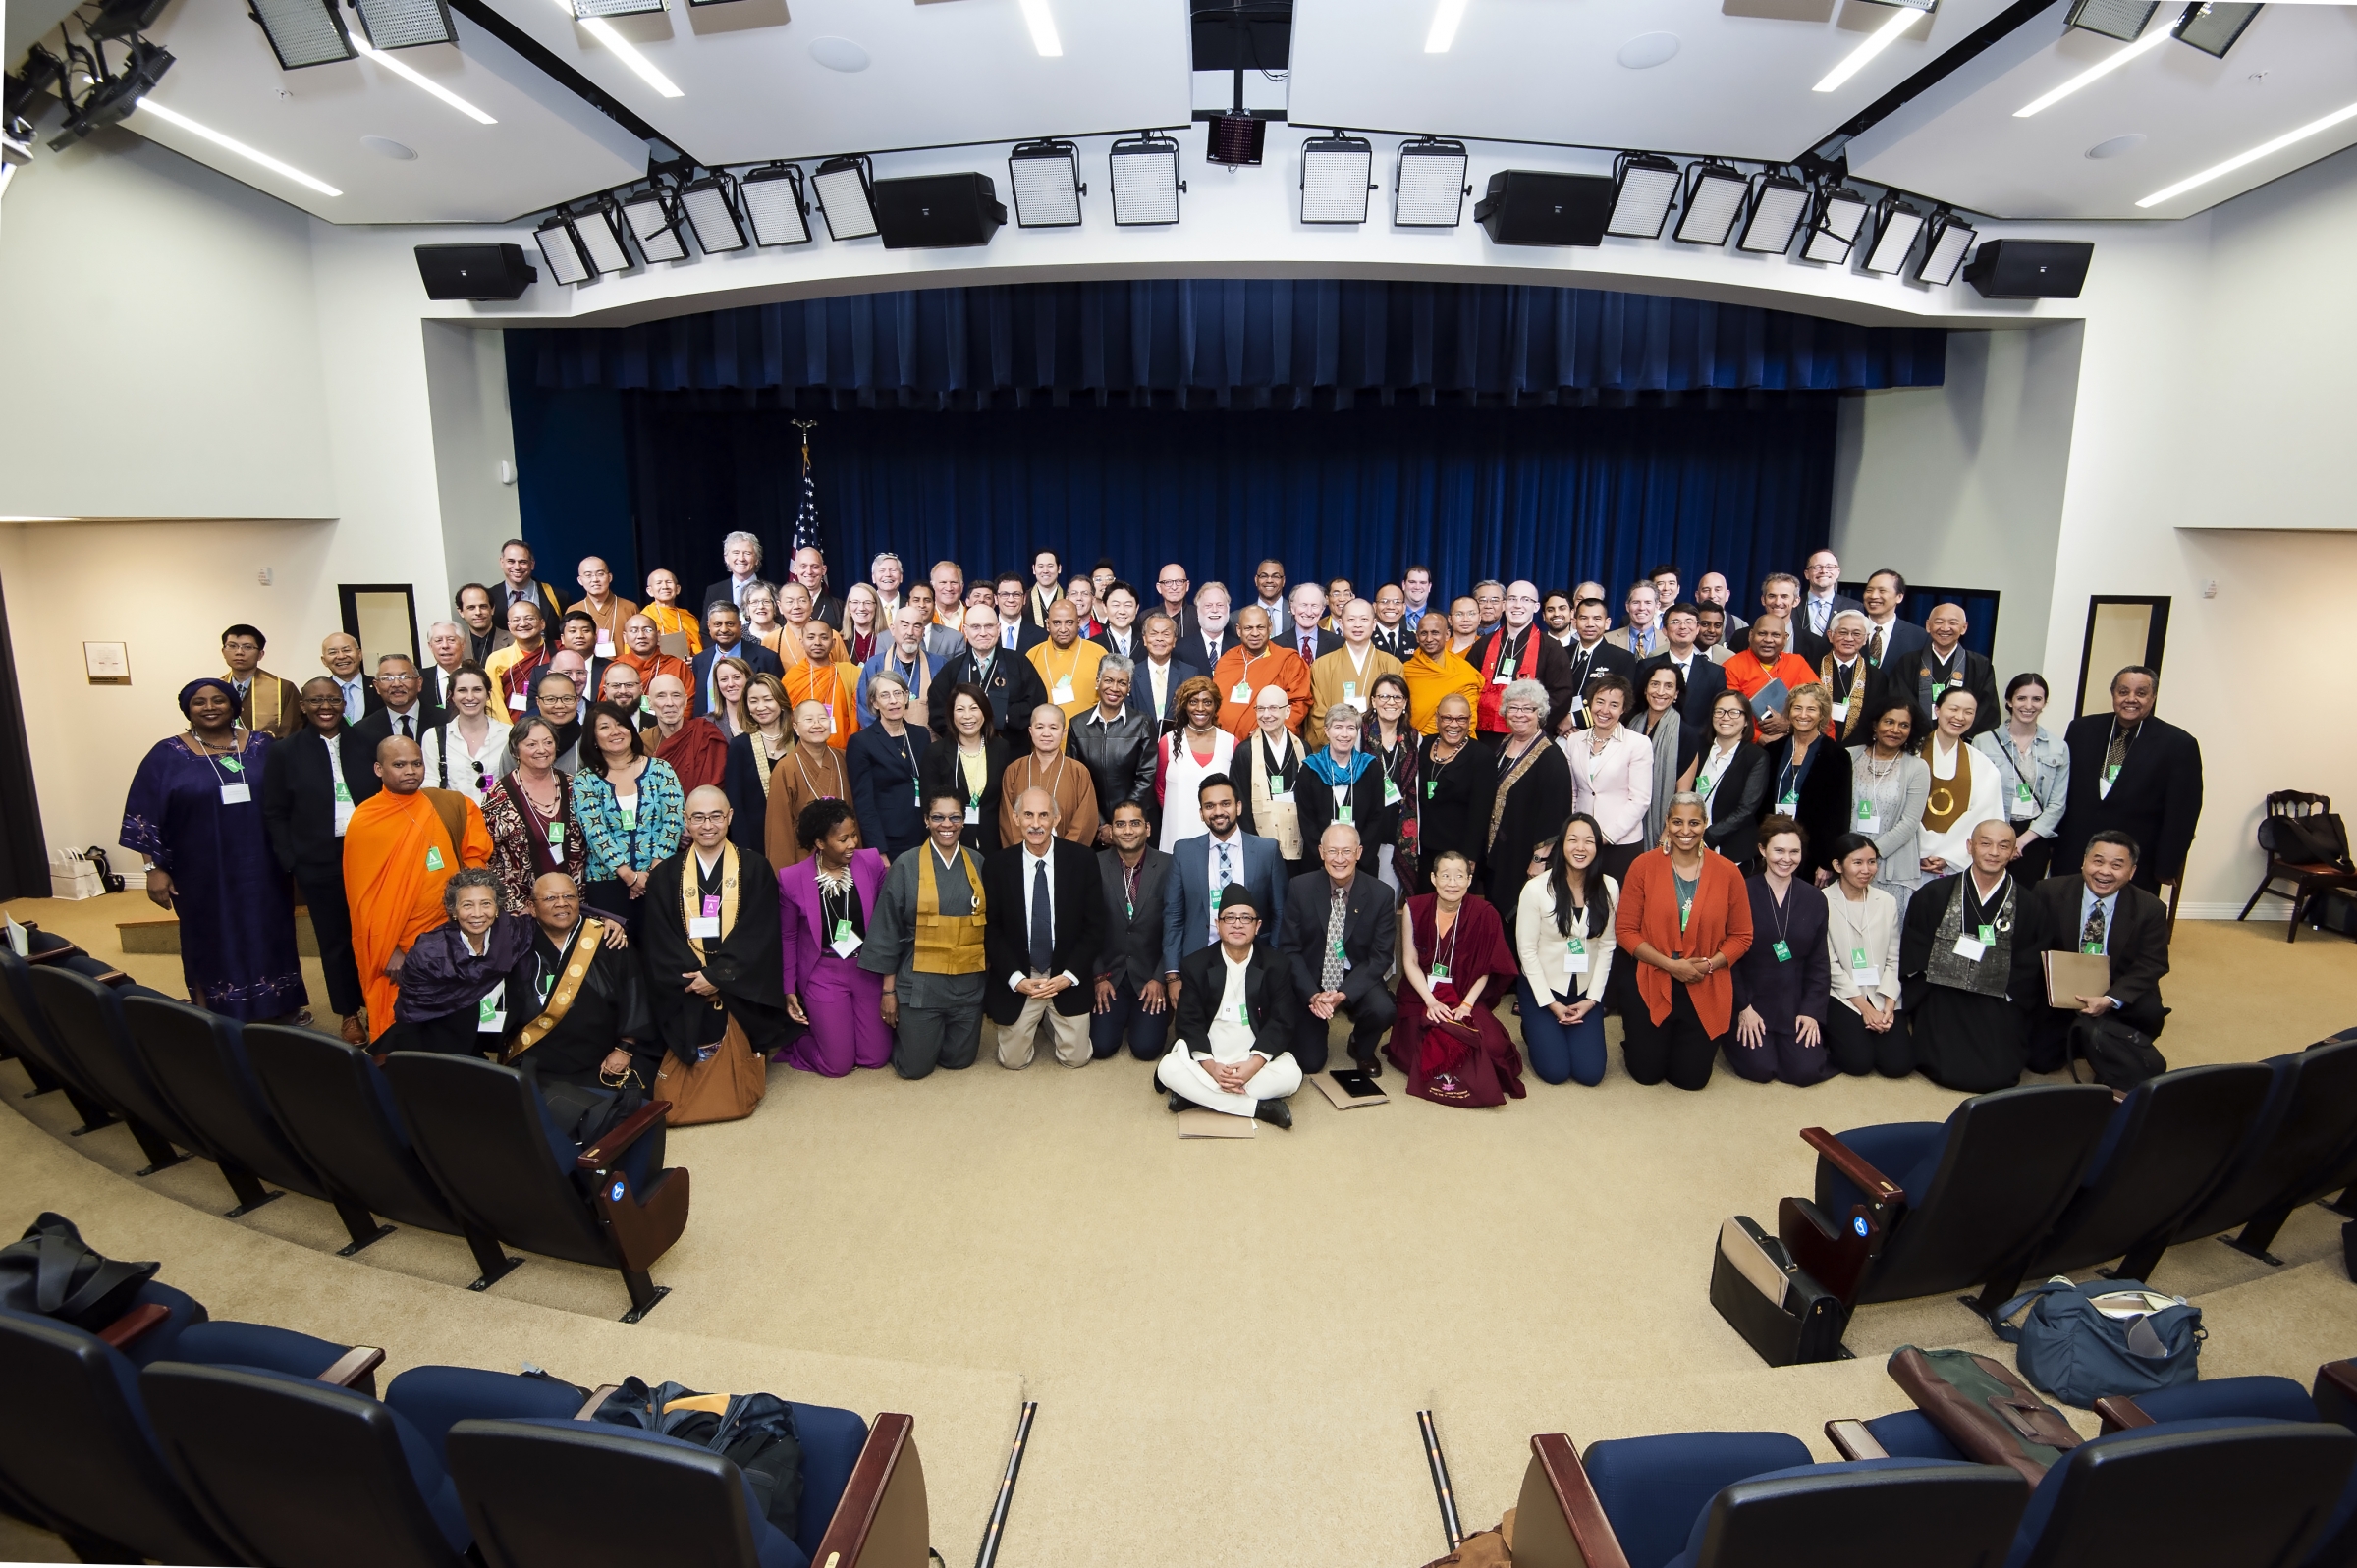 The White House U.S. Buddhist Leaders Conference. Photo reprinted courtesy Philip Rosenberg.